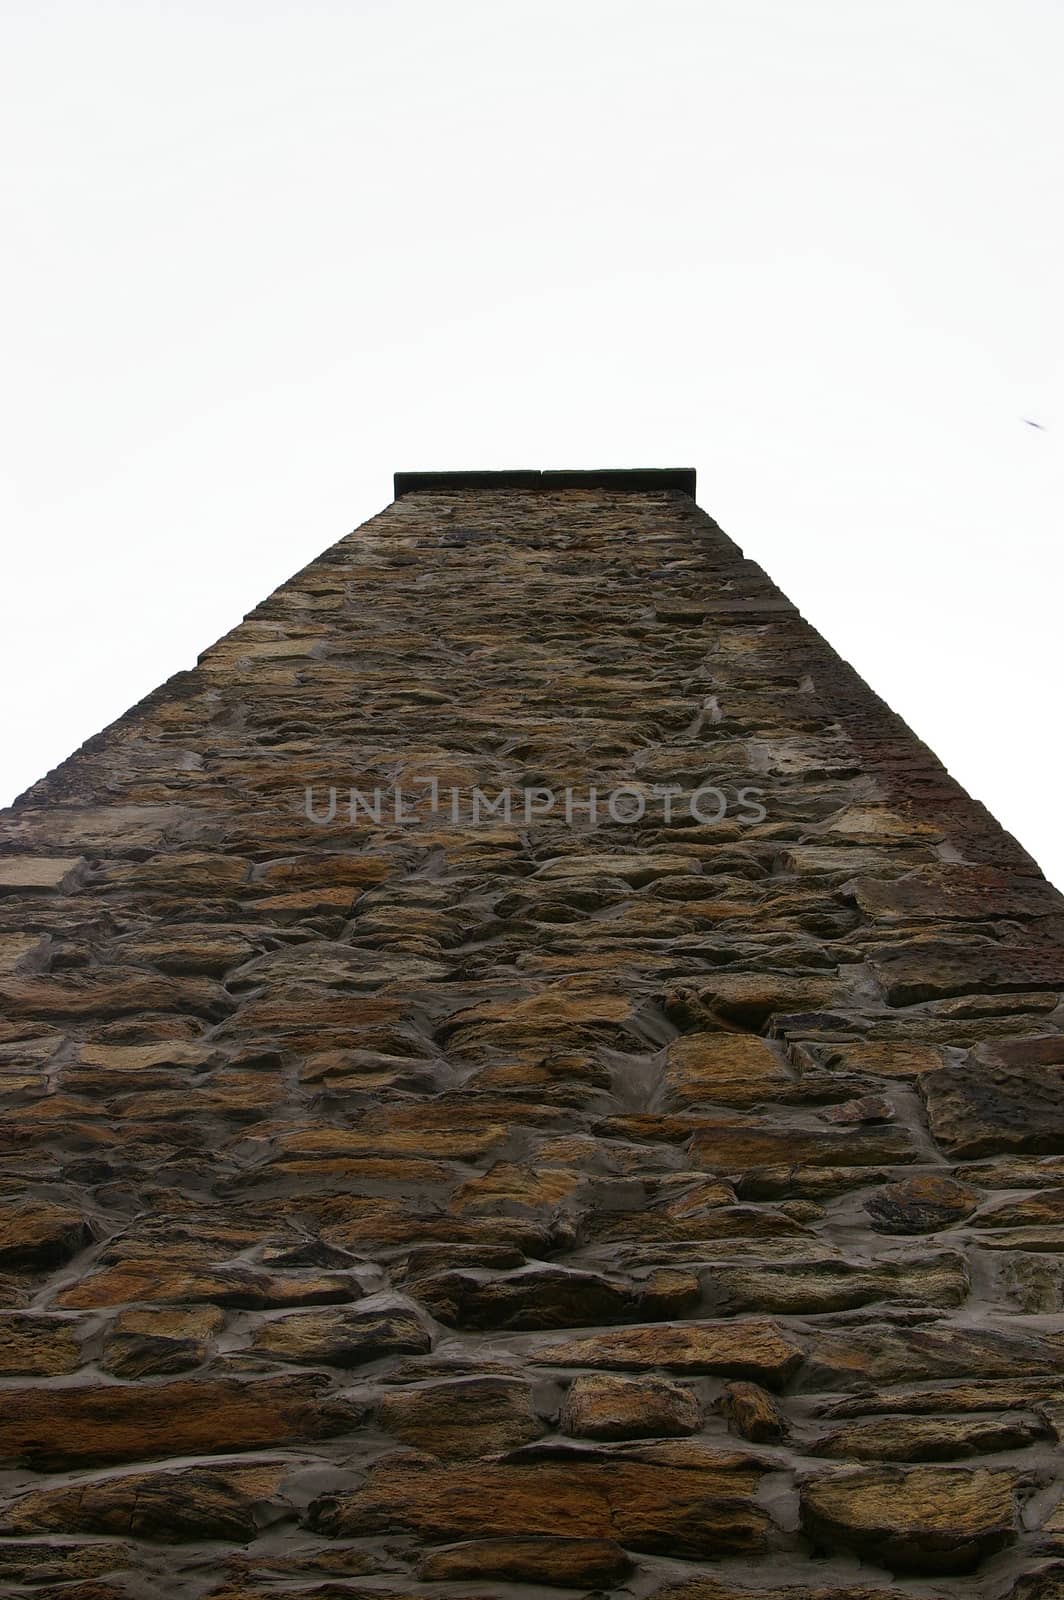 Chimney tower from base to top